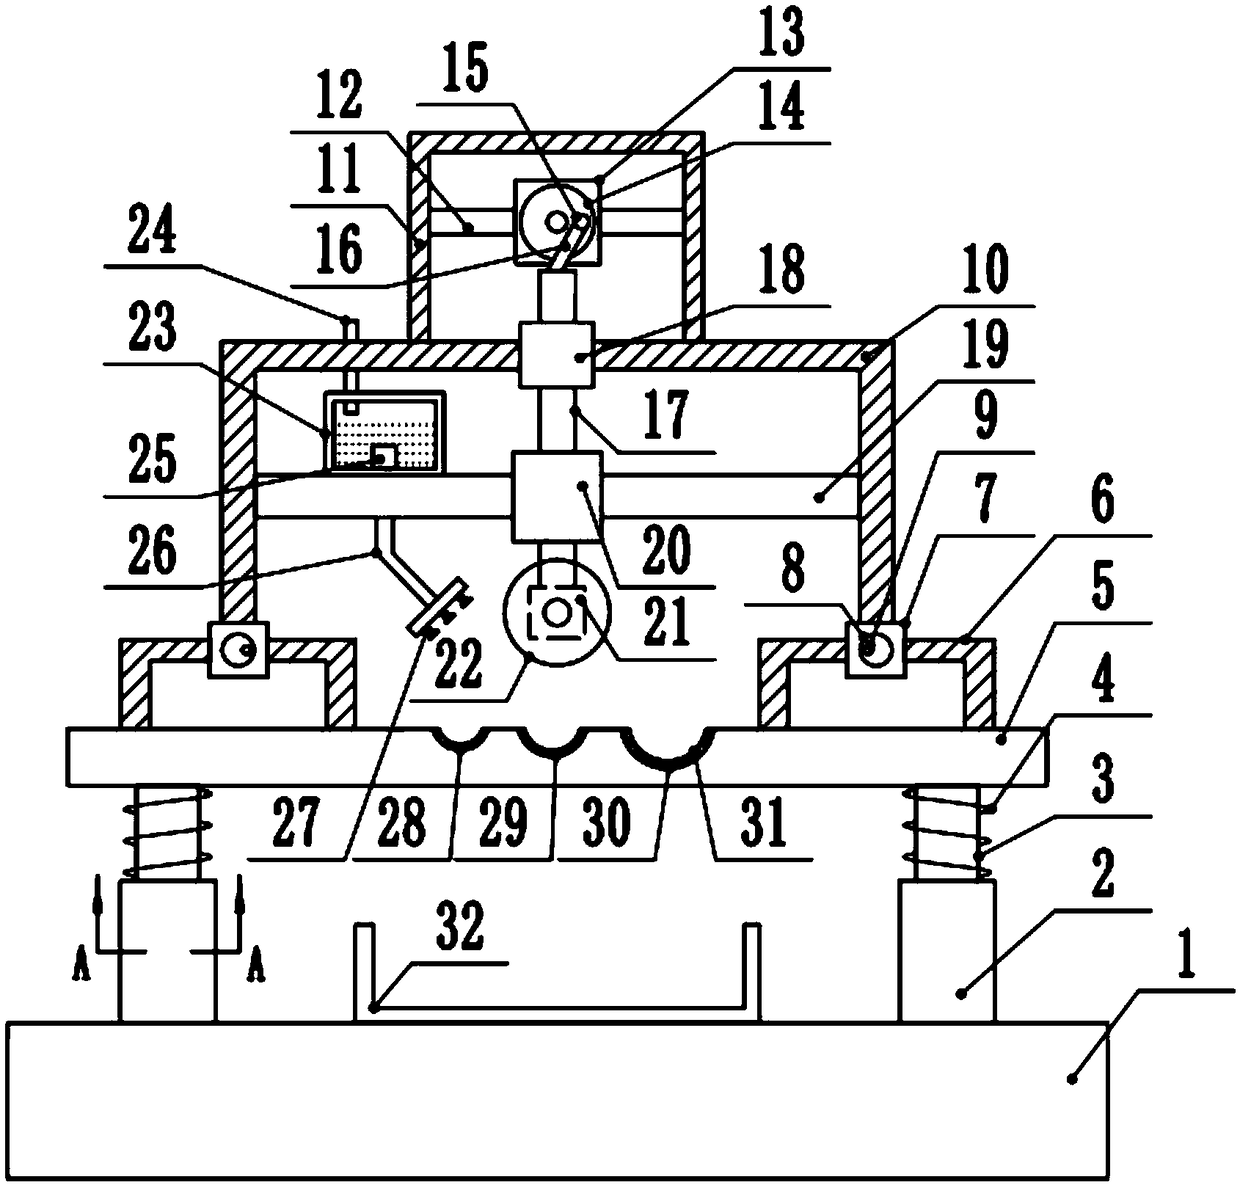 Mechanical machining device for plastic pipes for buildings